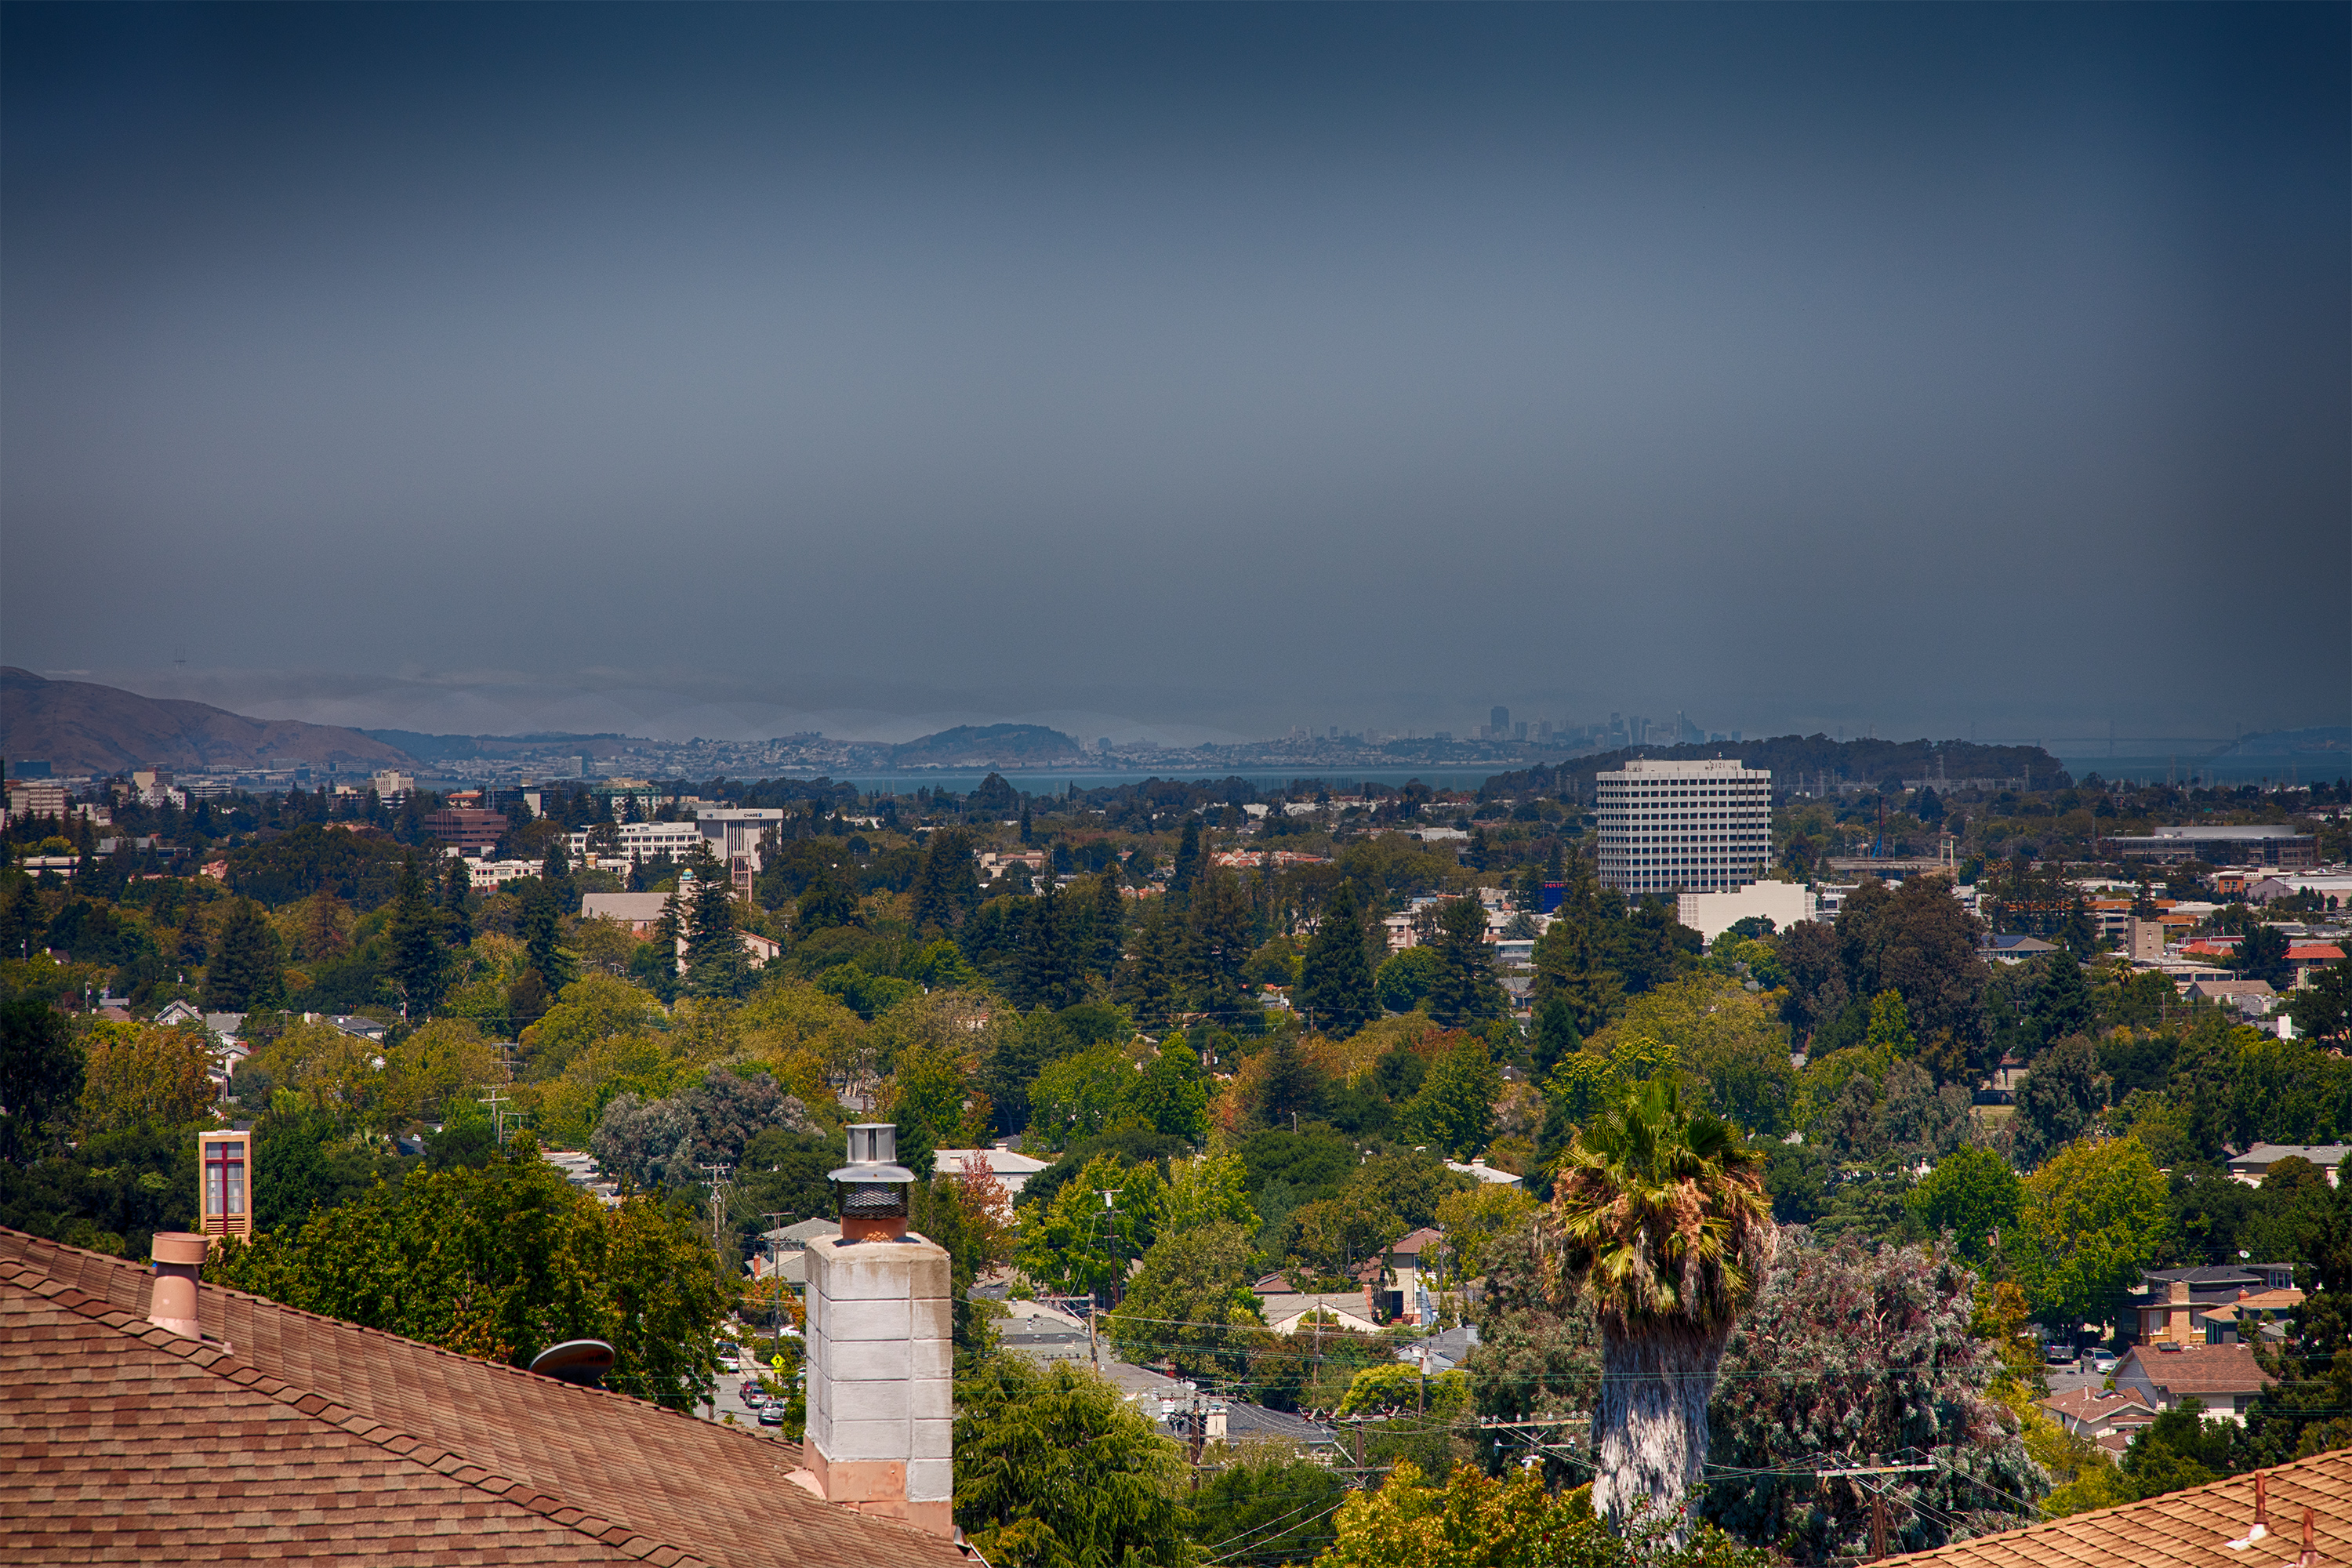 305 Rolling Hills Ave, San Mateo 94403 - Sf Porch View (A)